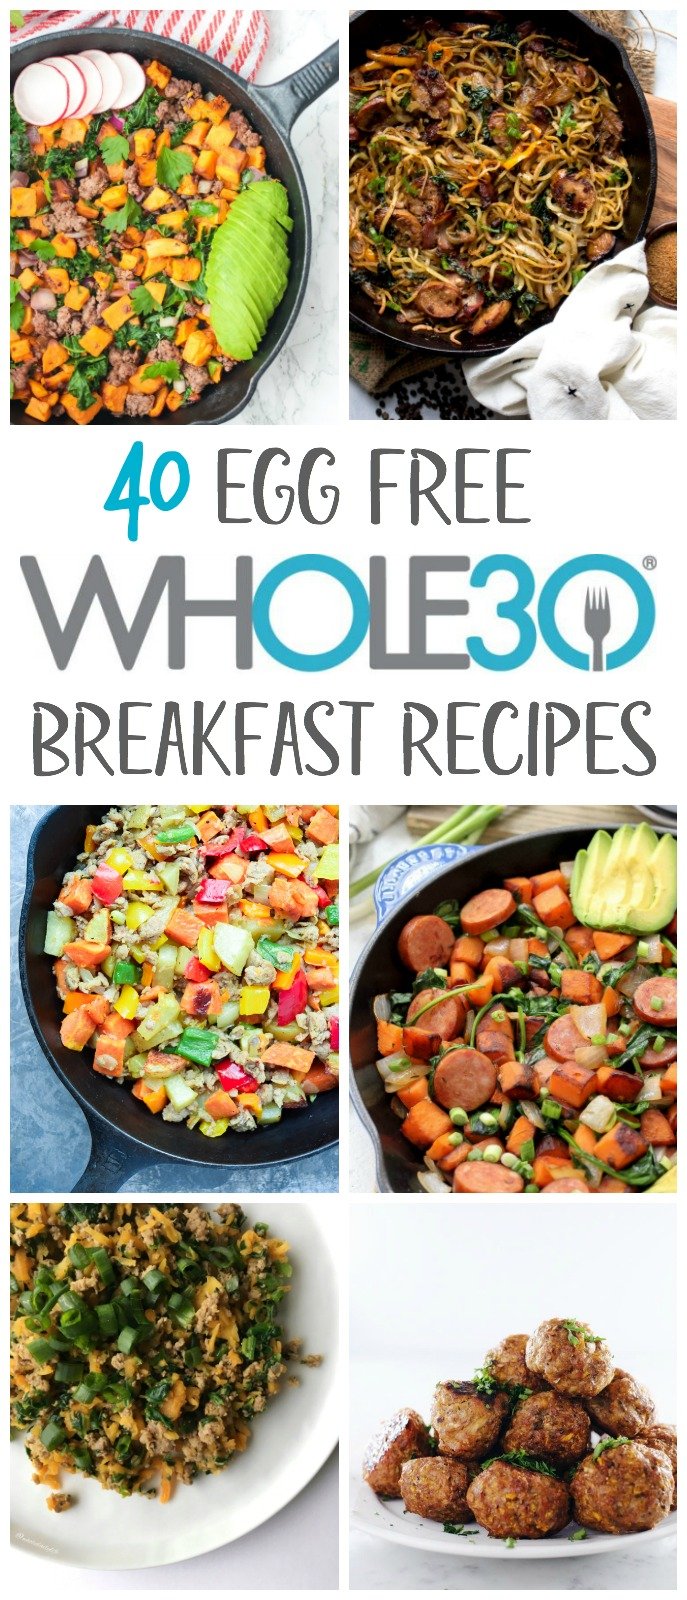 40 whole30 egg free breakfast recipes for when you need a eggless breakfast. These egg free recipes include whole30 and paleo breakfast skillets, sausages, egg-free casseroles and more. #eggfreebreakfast #paleoeggfreebreakfast #whole30breakfast 